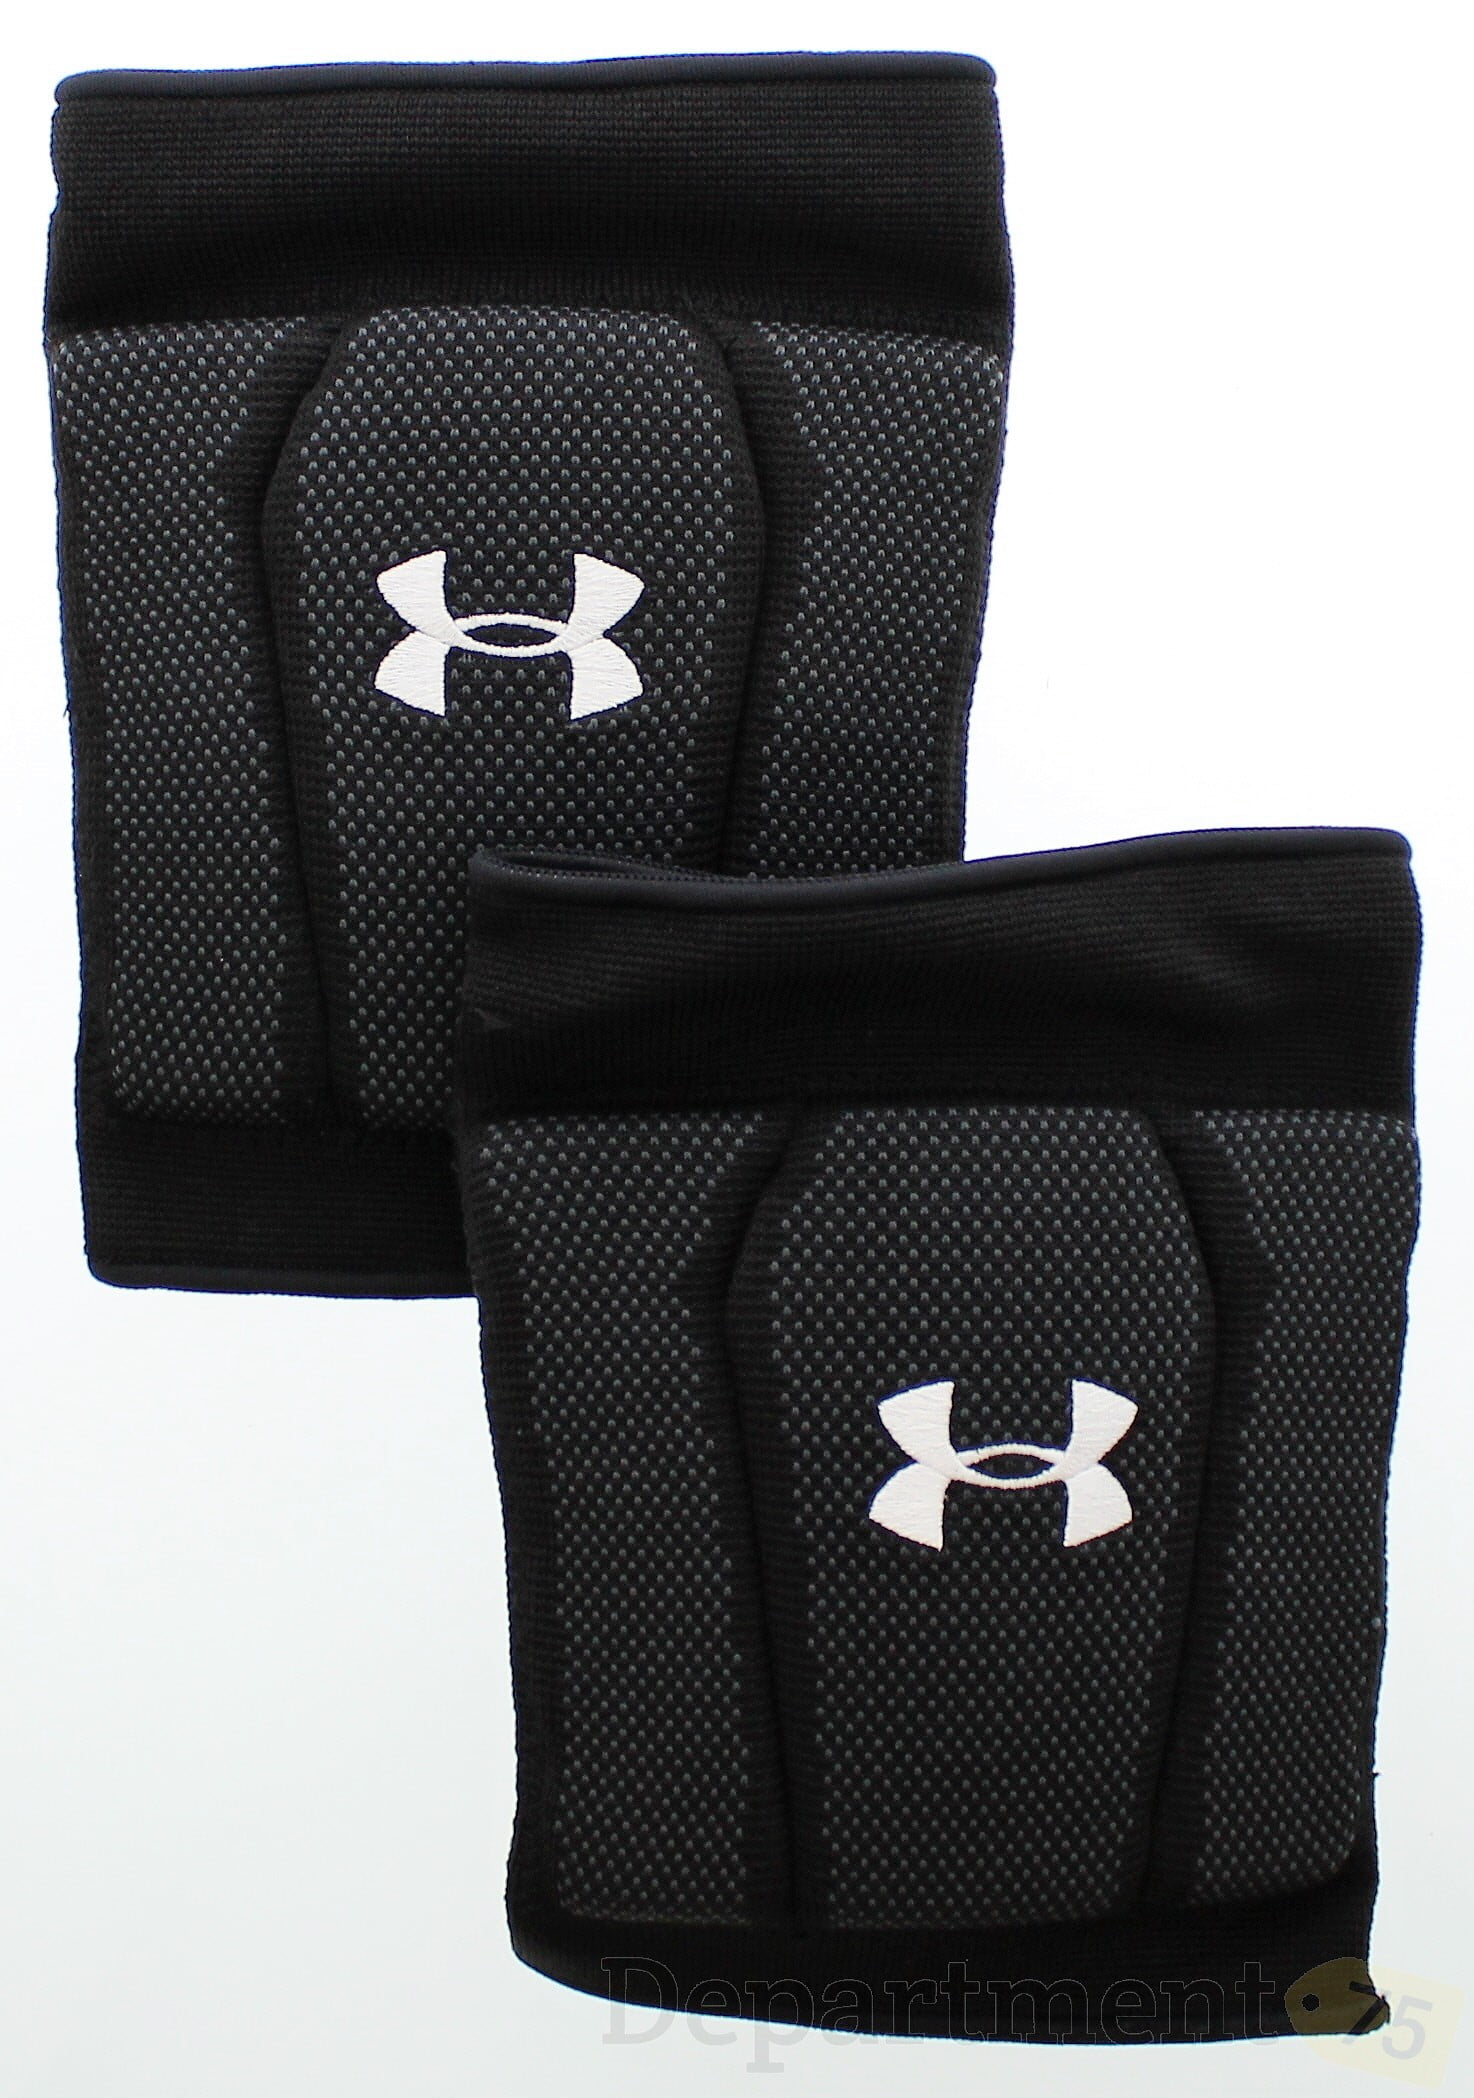 Under Armour Unisex Armour Volleyball Knee Pad L/XL NEW In Retail Packaging 